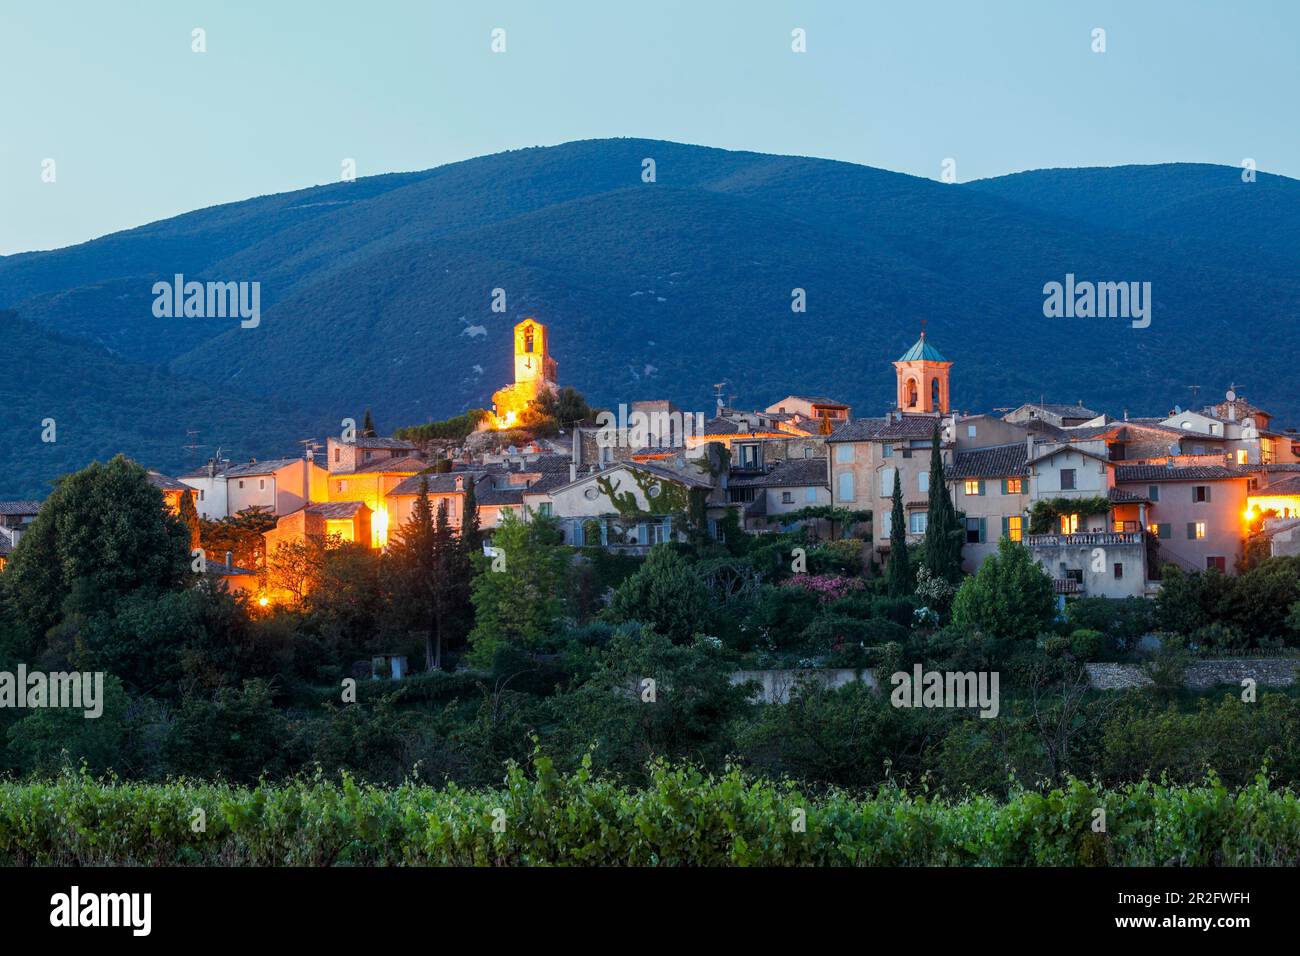 Village of Lourmarin in the Luberon, Vaucluse, Provence, France Stock Photo